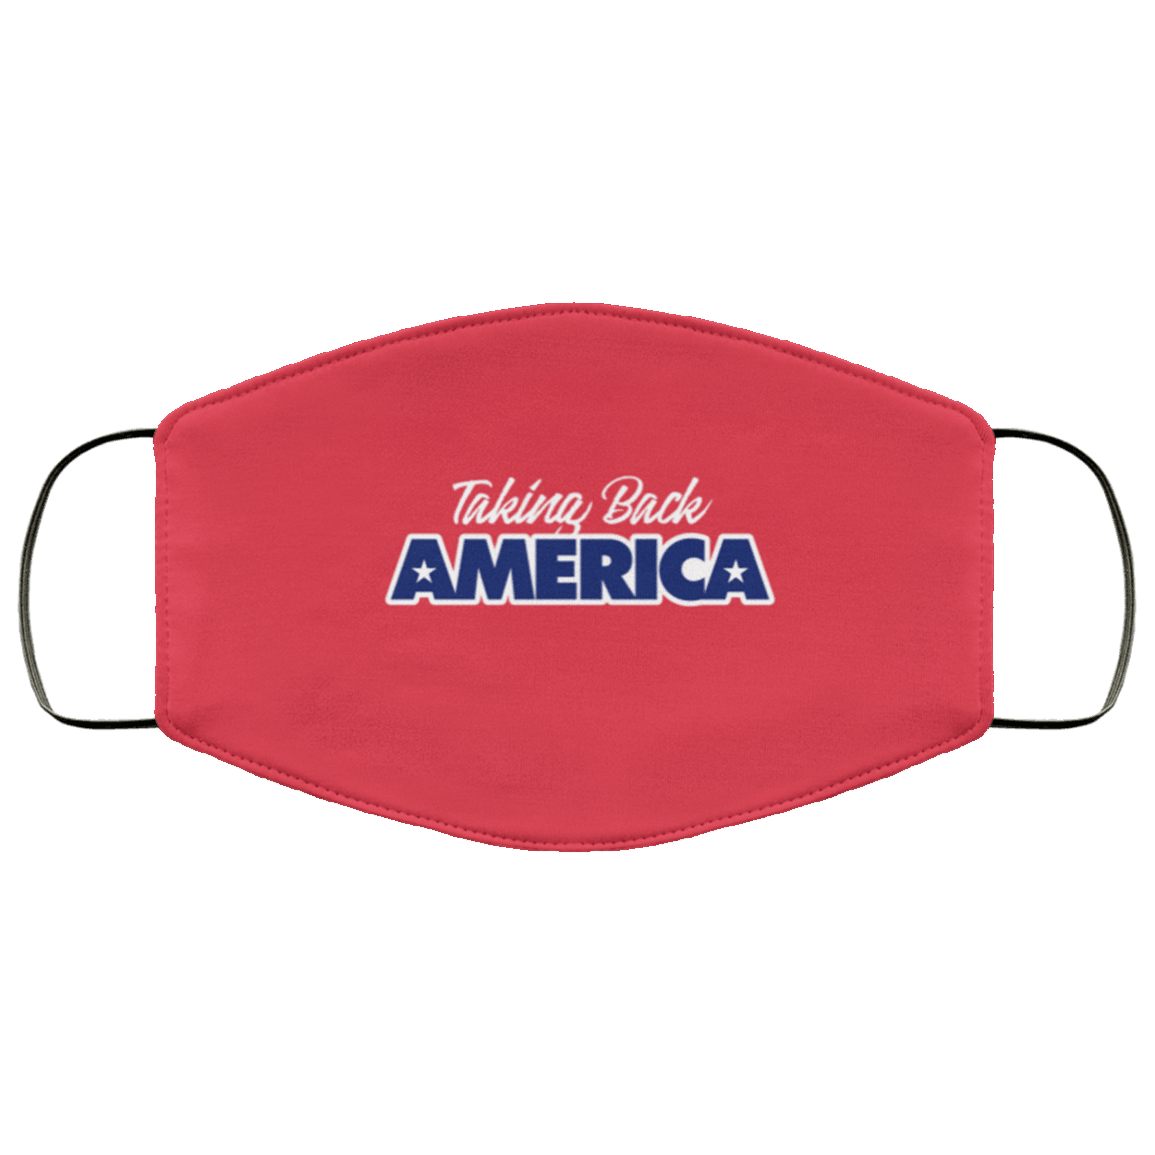 Designs by MyUtopia Shout Out:Trump Taking Back America Adult Fabric Face Mask with Elastic Ear Loops,3 Layer Fabric Face Mask / Red / Adult,Fabric Face Mask